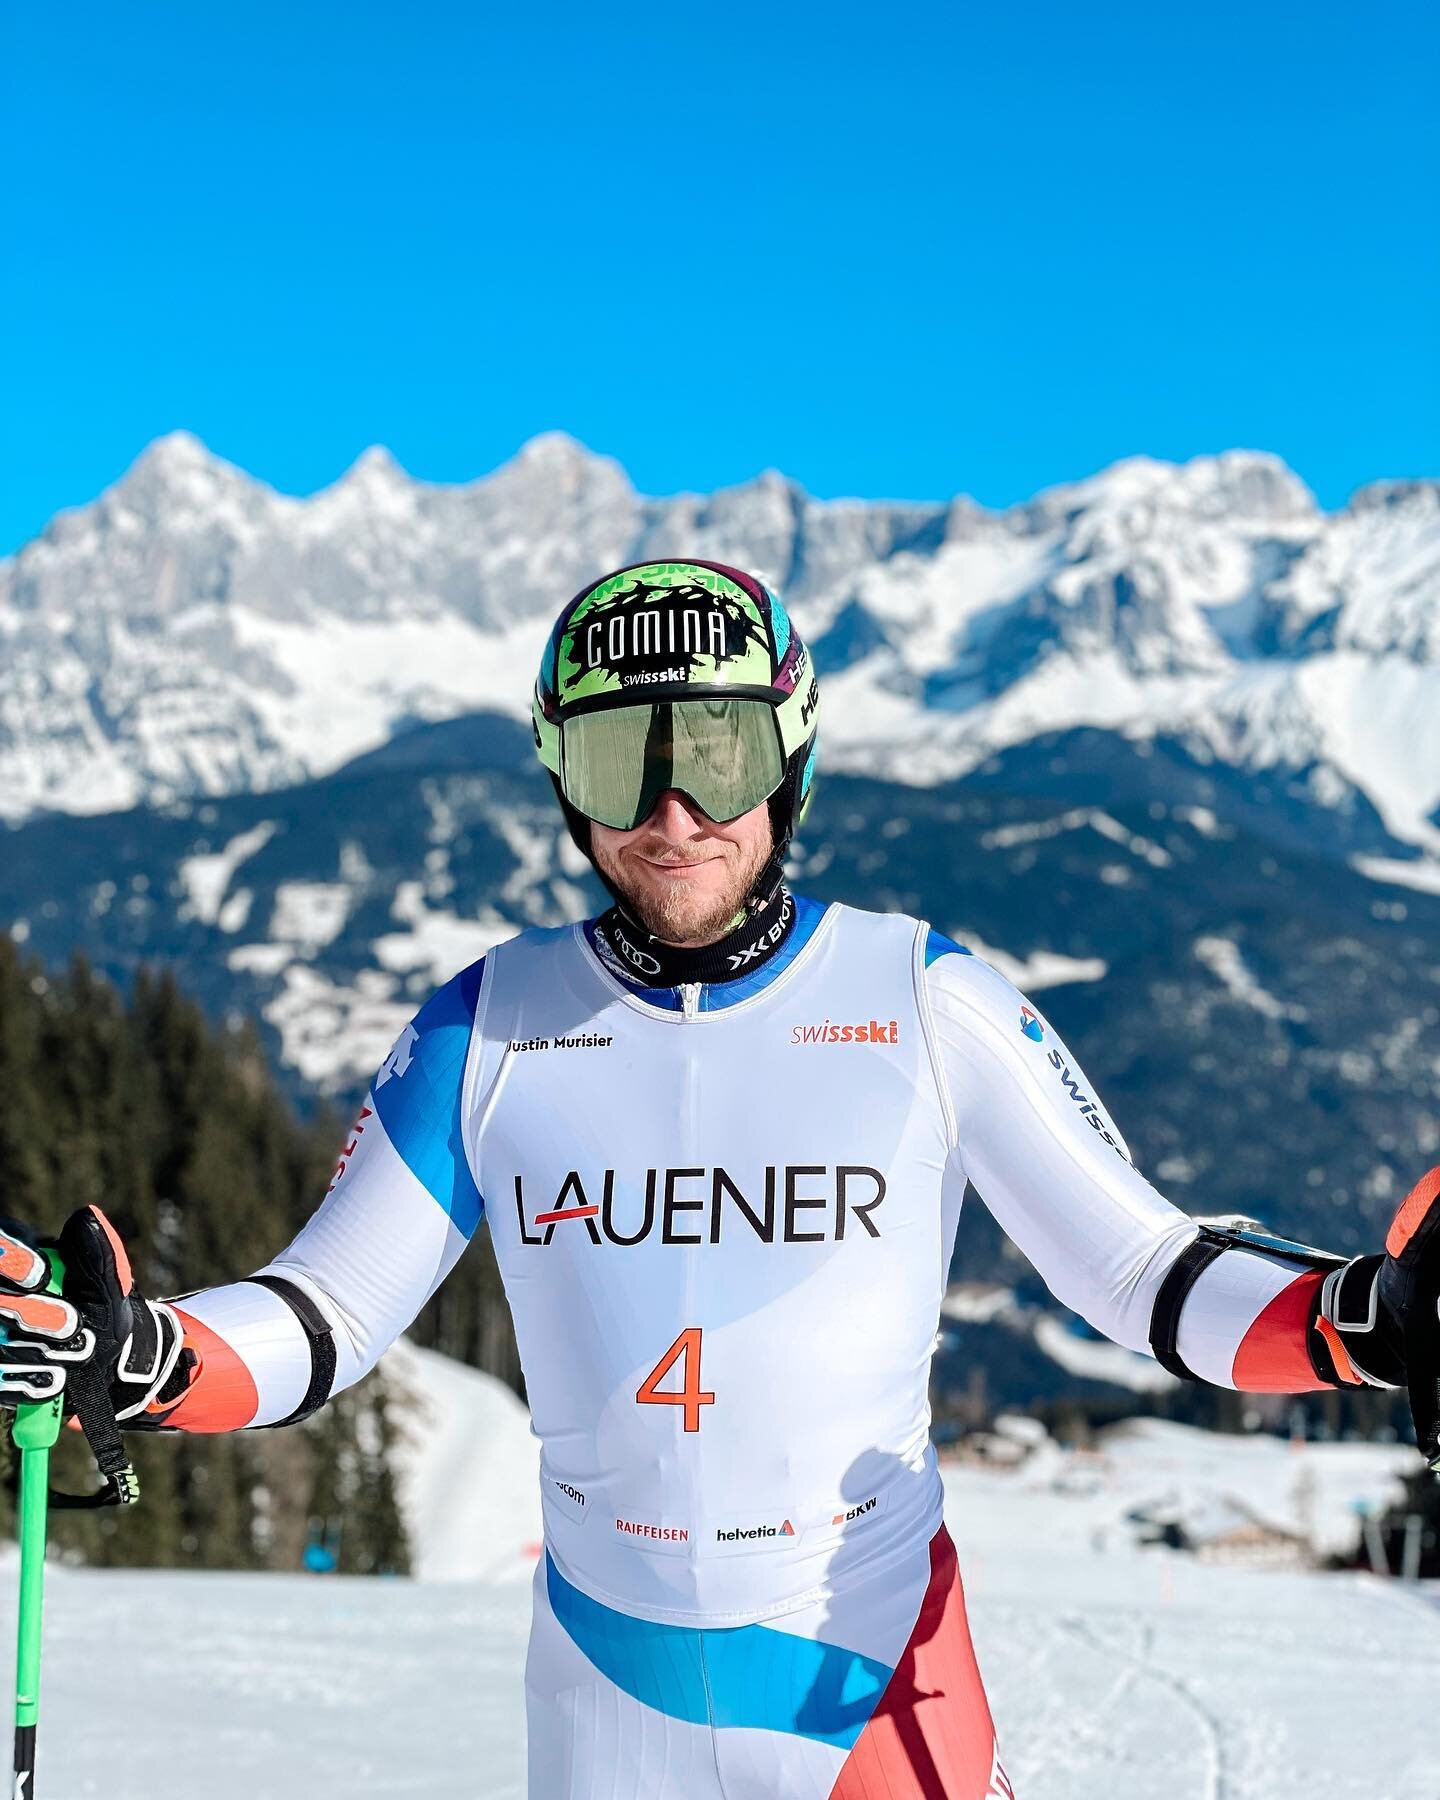 The last preparation is underway here in @reiteralm with perfect conditions!
Next &mdash;&gt; Kranjska Gora

I also would like to thank Lauener for their trust in me and their great support. 

Les derni&egrave;res pr&eacute;parations sont en cours ic